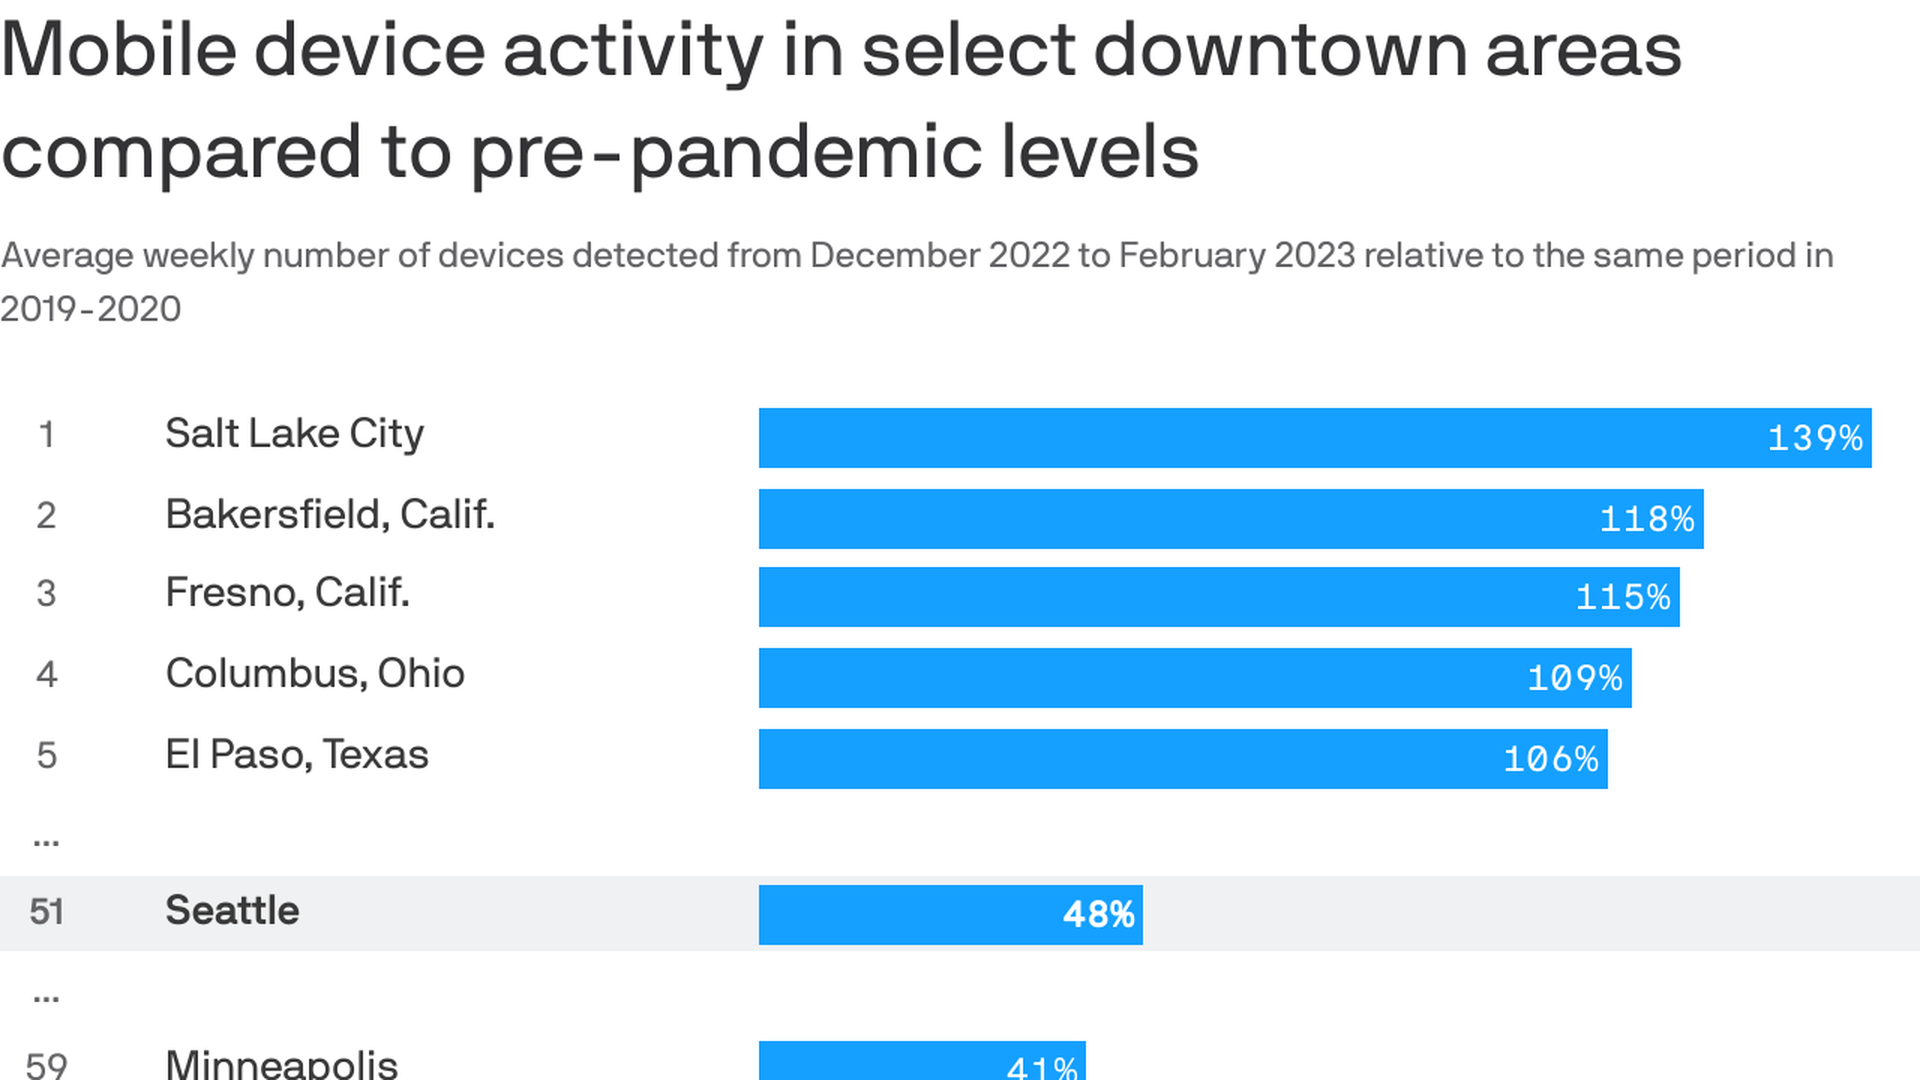 A bar chart showing Seattle's mobile device activity at 48% of pre-pandemic levels, behind Salt Lake City; Bakersfield, Calif., Fresno, Calif; Columbus, Ohio; and El Paso, Texas. 